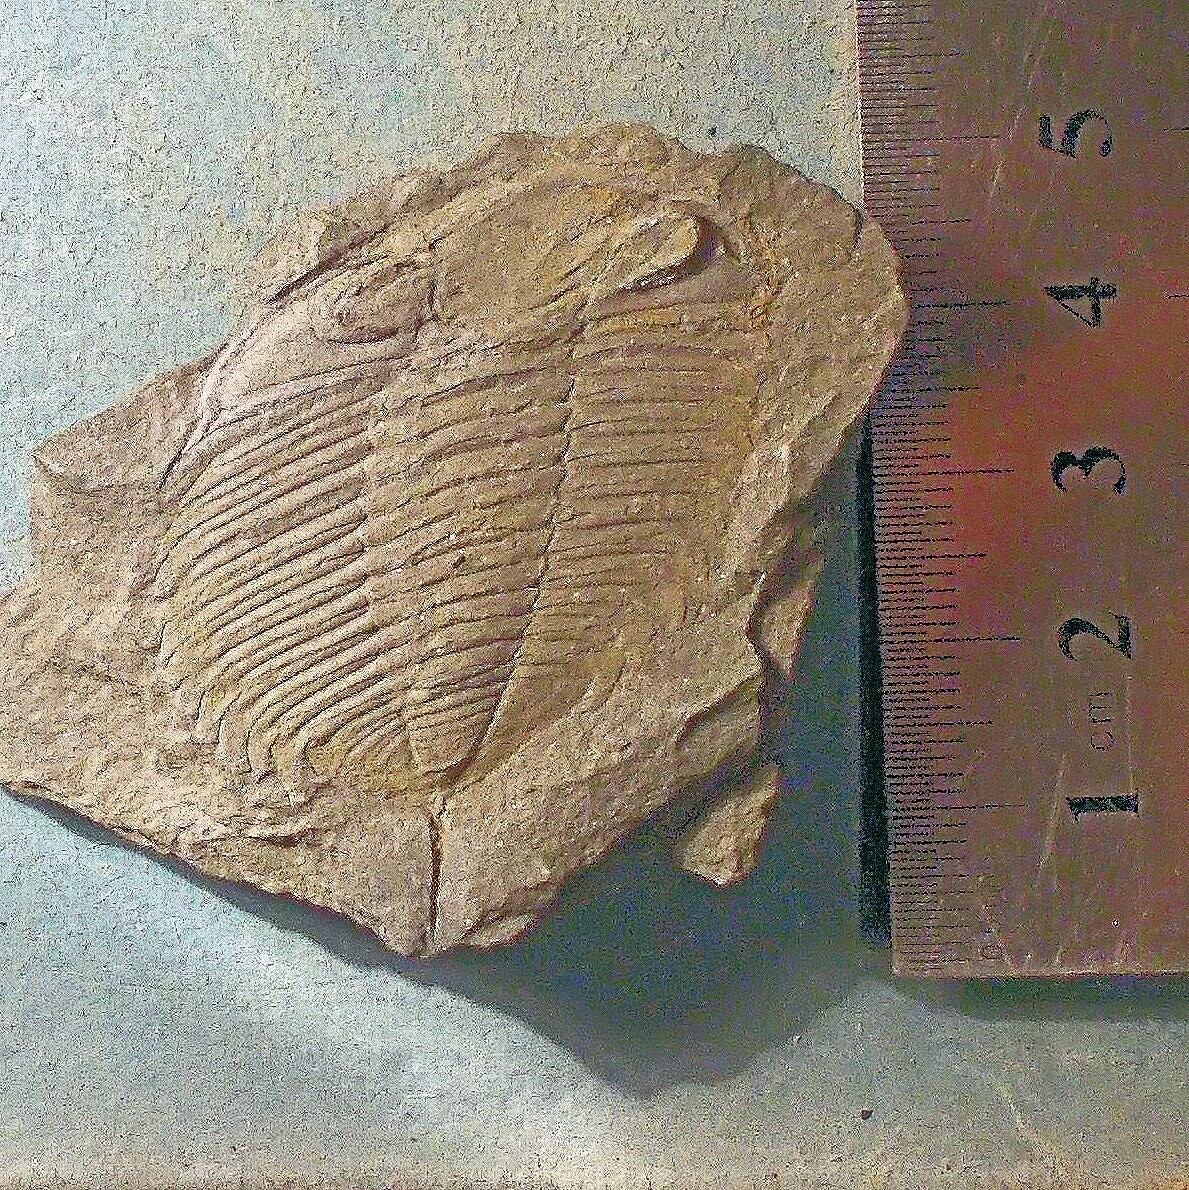 Fine 4.7cm complete Eodalmanitina destombesi with eyes/ spines: Ordovician, Llanvirn Series, Valongo Formation, Portugal.